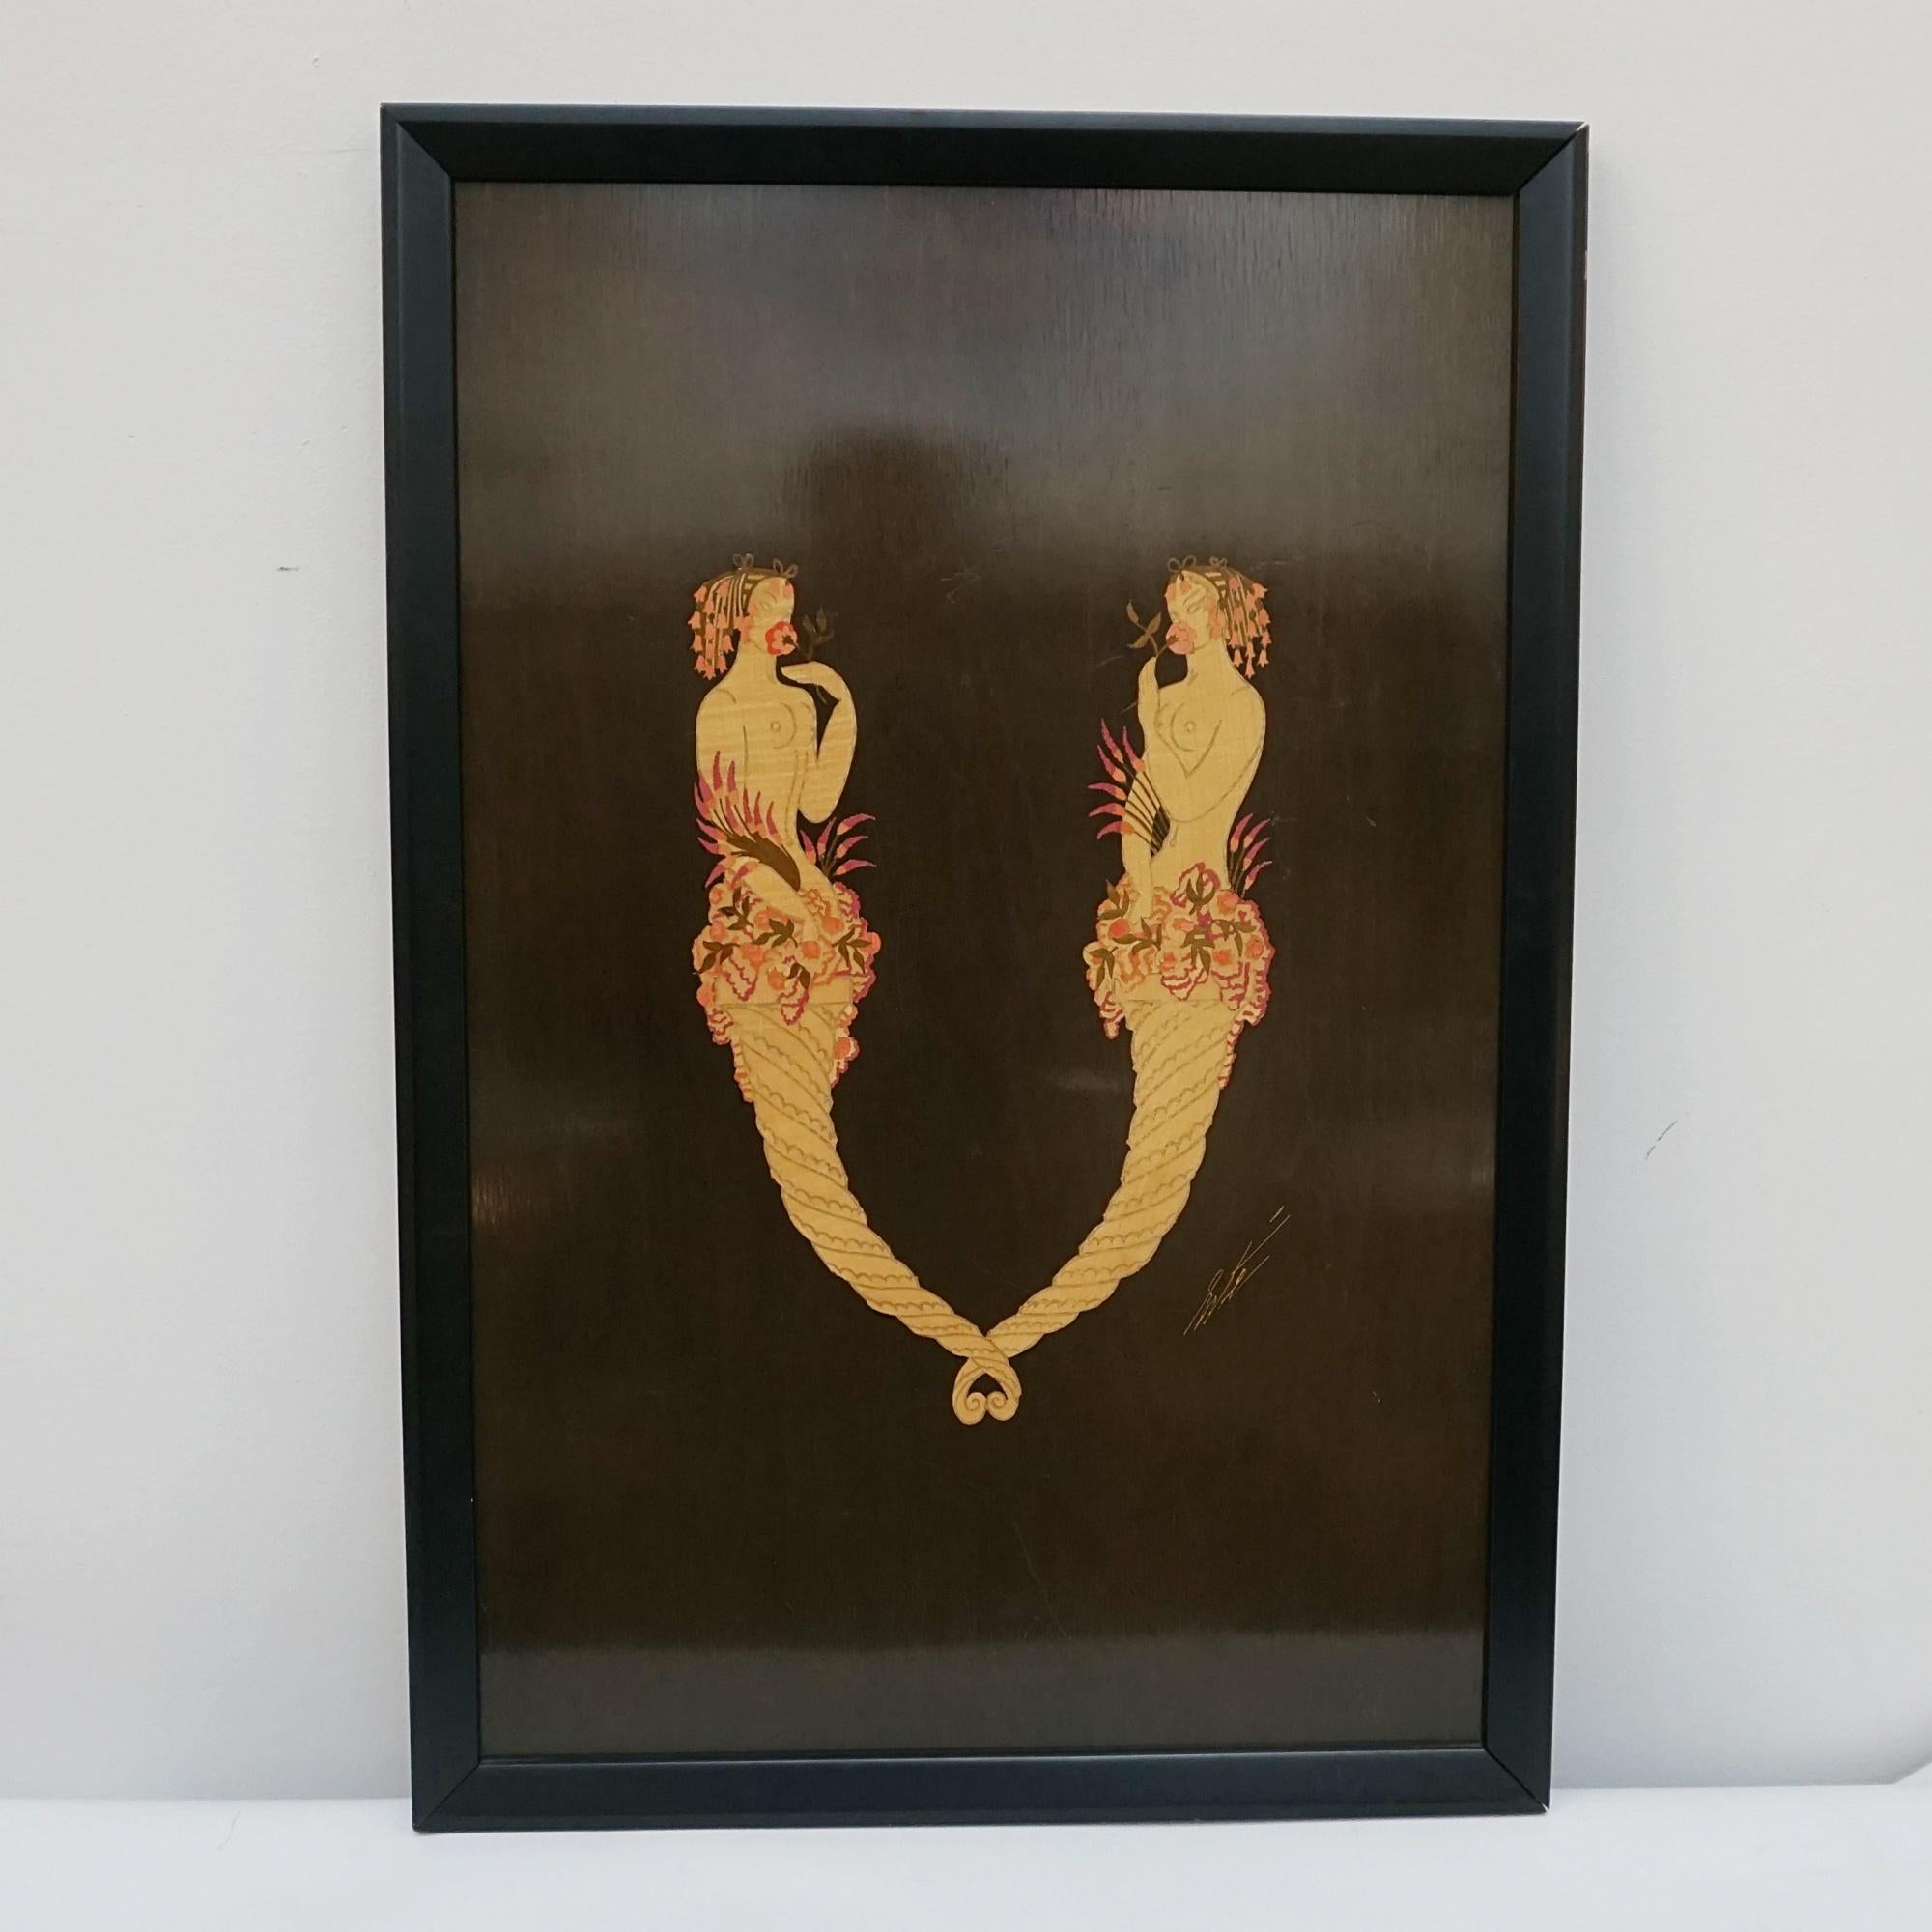 'V' by Erté (Romain de Tirtoff) as part of the alphabet series. A marquetry panel depicting two mermaids intertwined to form the letter 'V'. The marquetry work was undertaken by Georges Vriz around 1977. Sevenarts edition. Signed 'Erte' to lower